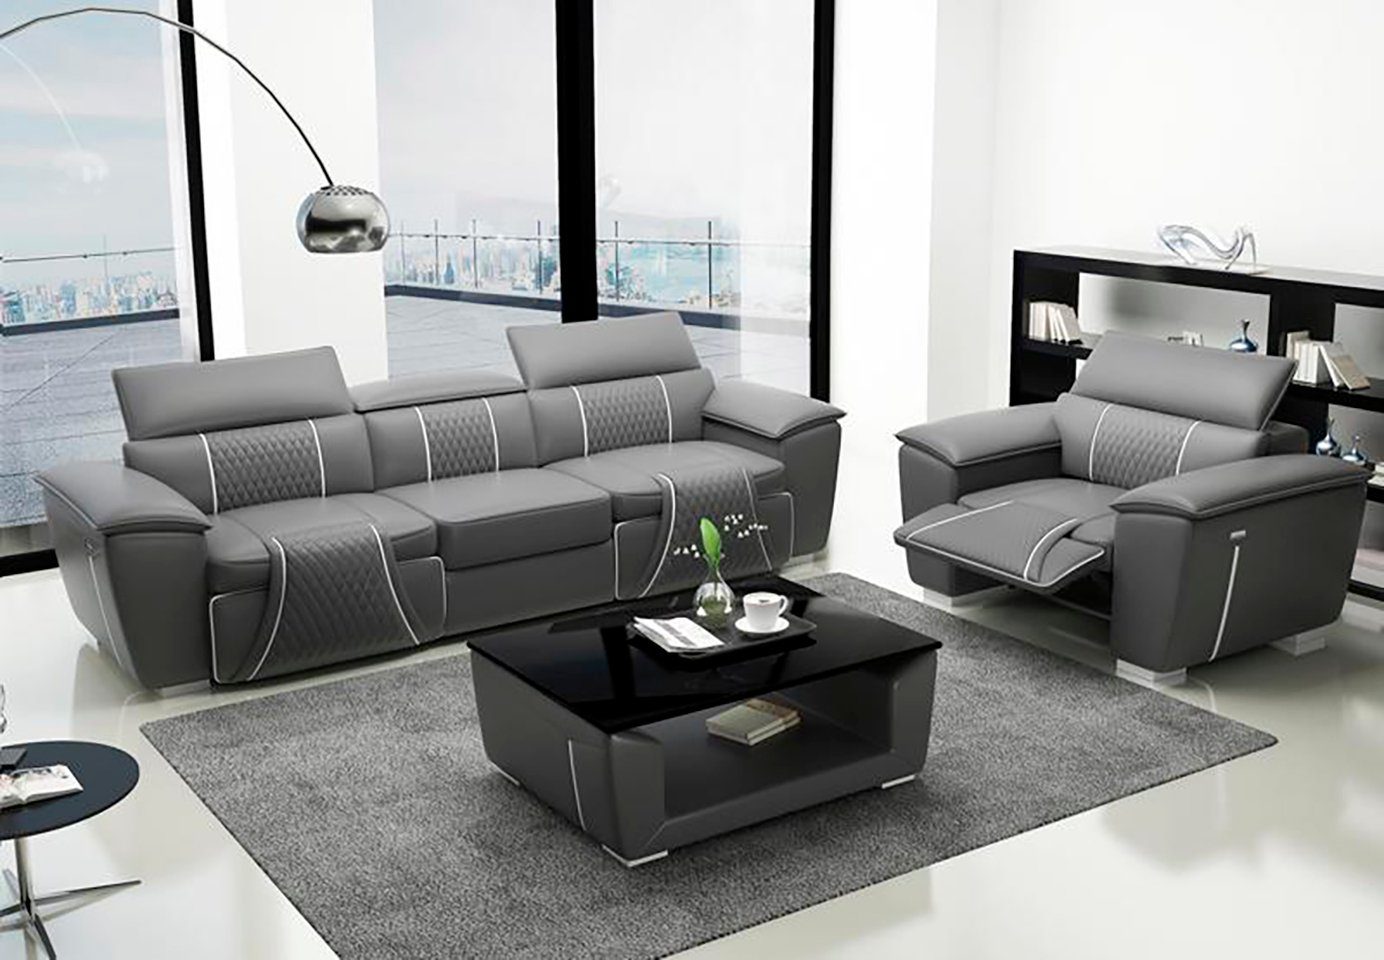 JVmoebel Sofa Multifunktions Couch Relax Sofagarnitur Polster Sofa 3+2+2 Sitzer, Made in Europe